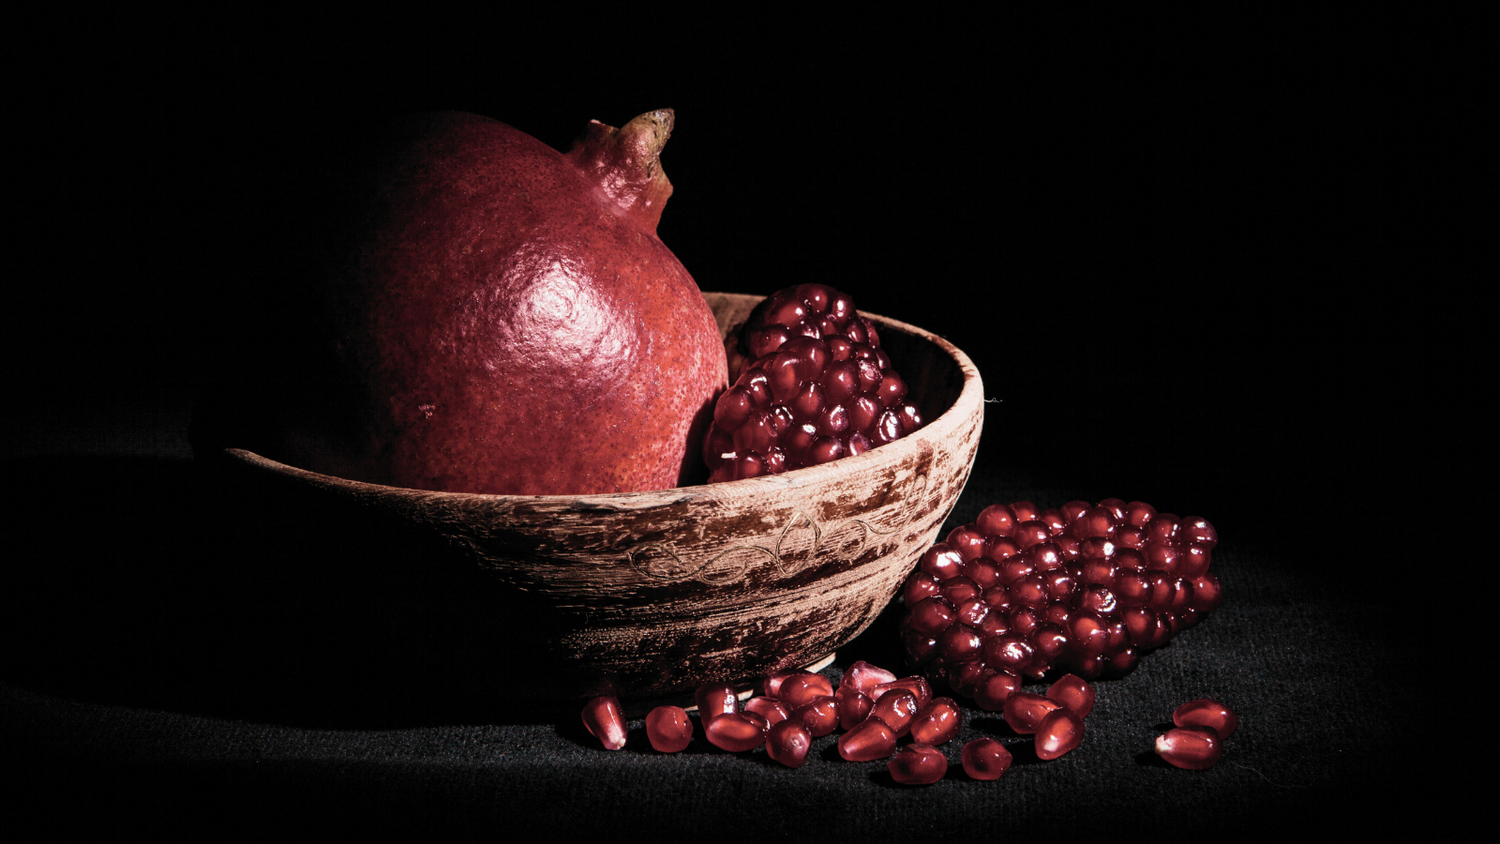 Pomegranate Seed Oil: A Potent Antioxidant